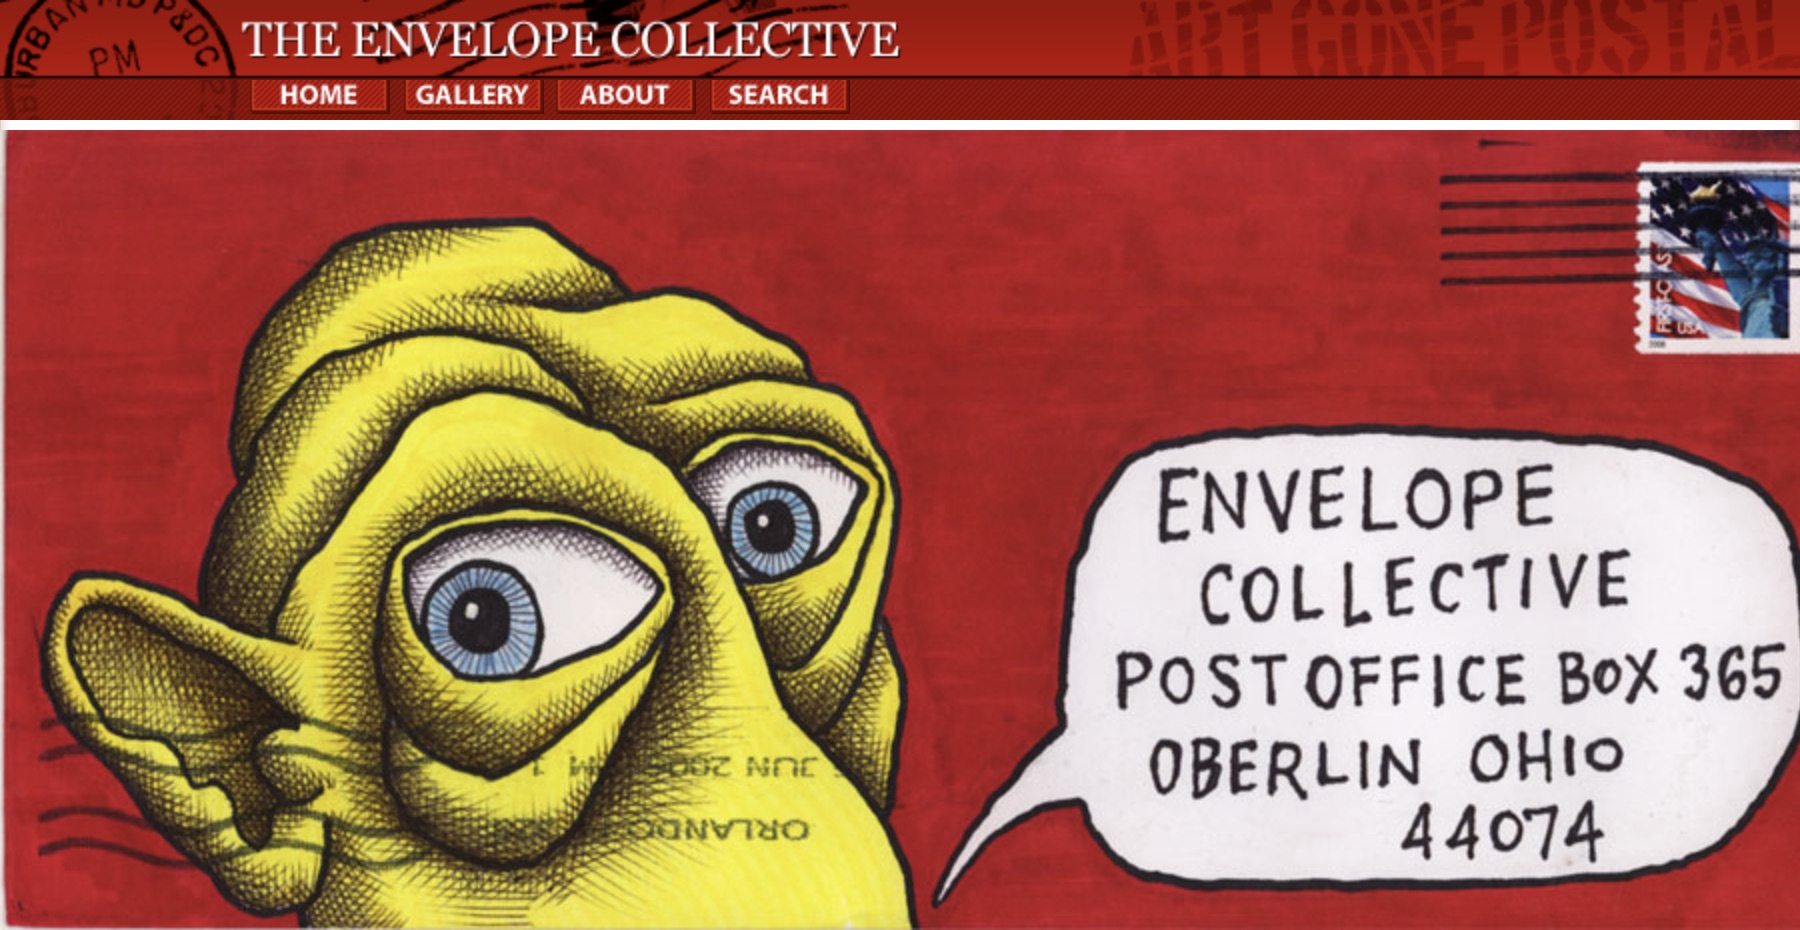 The Envelope Collective